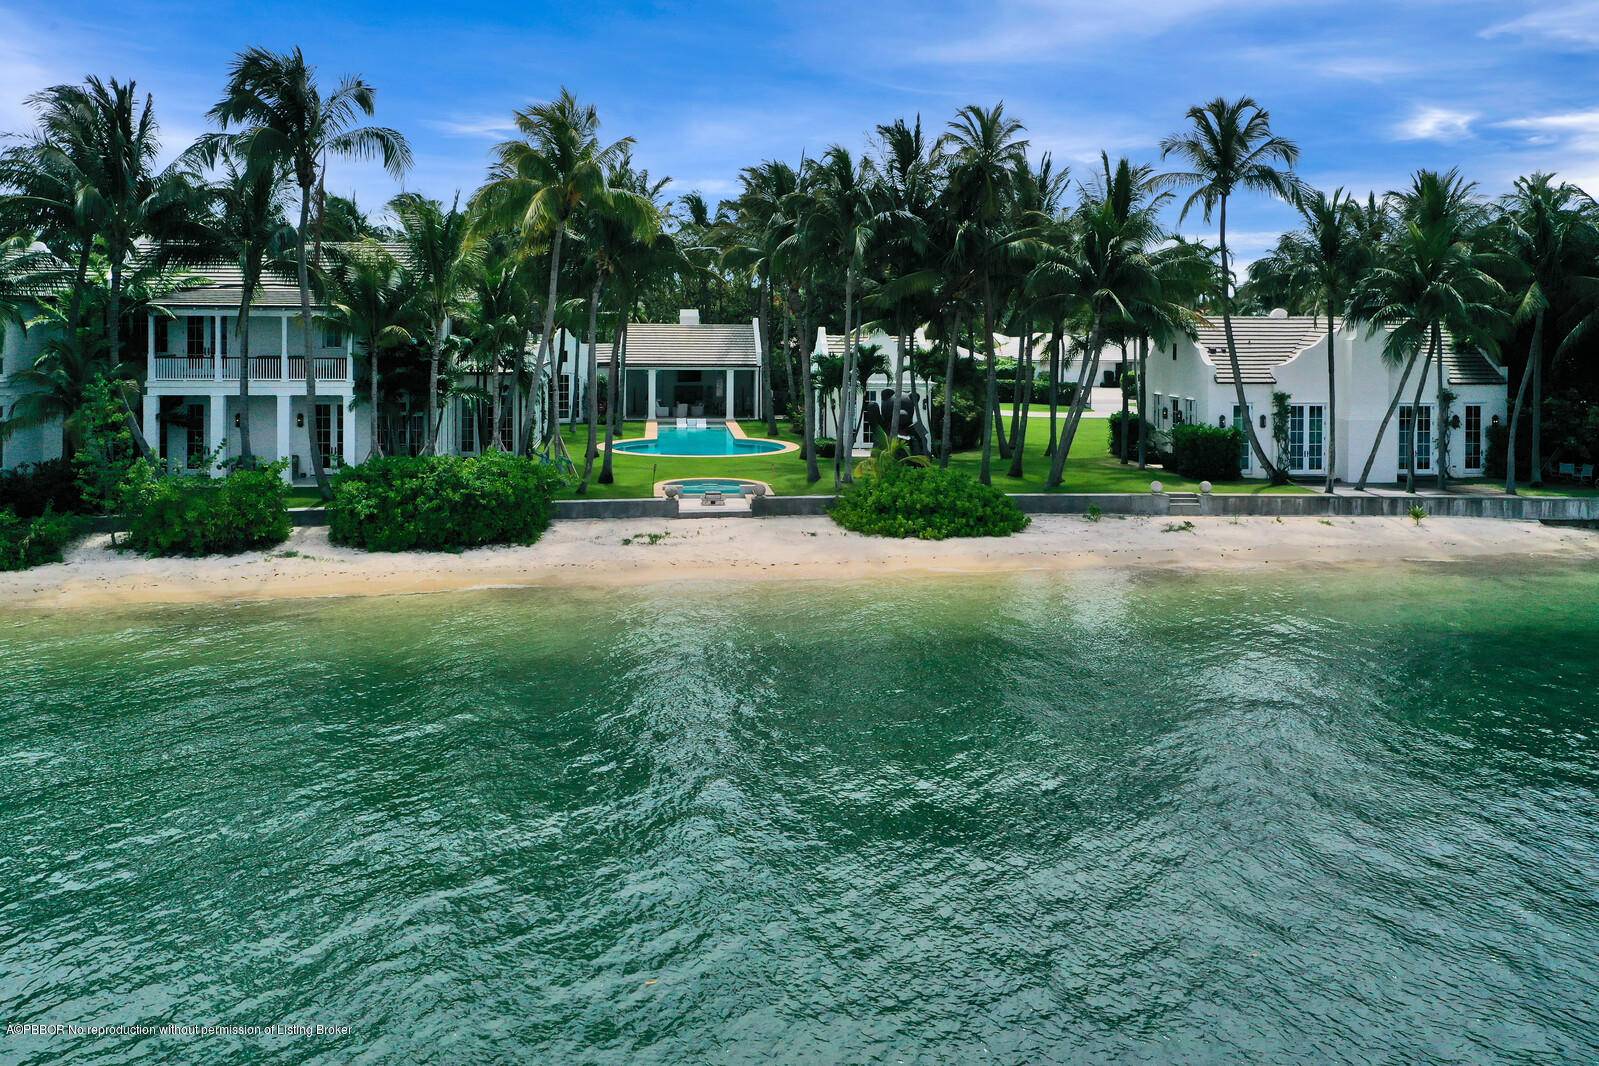 Sensational estate compound with morethan 250 feet of sandy beach on the Lake.